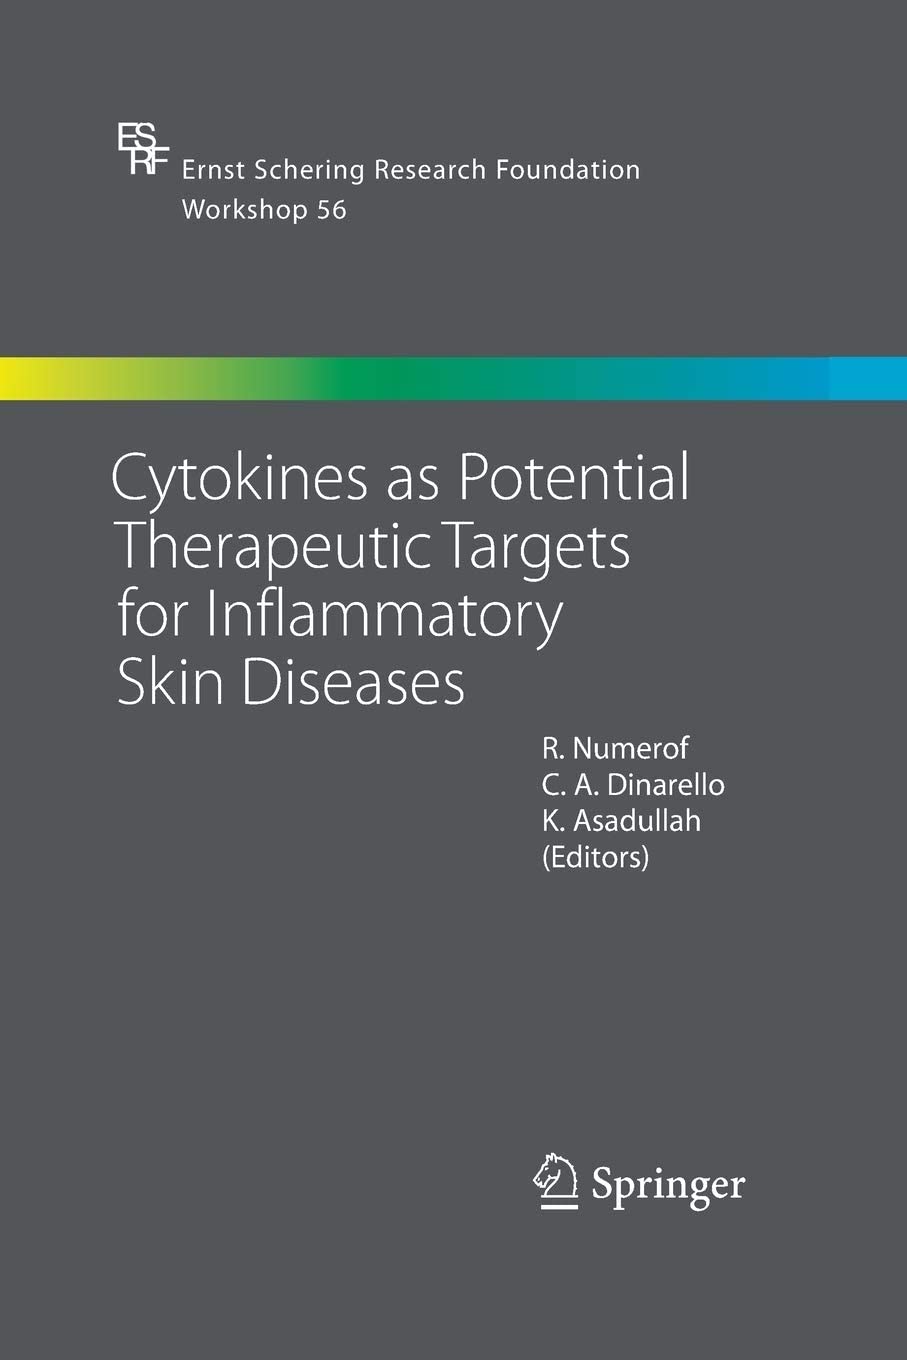 Cytokines as Potential Therapeutic Targets for Inflammatory Skin Diseases (Ernst Schering Foundation Symposium Proceedings, 56)